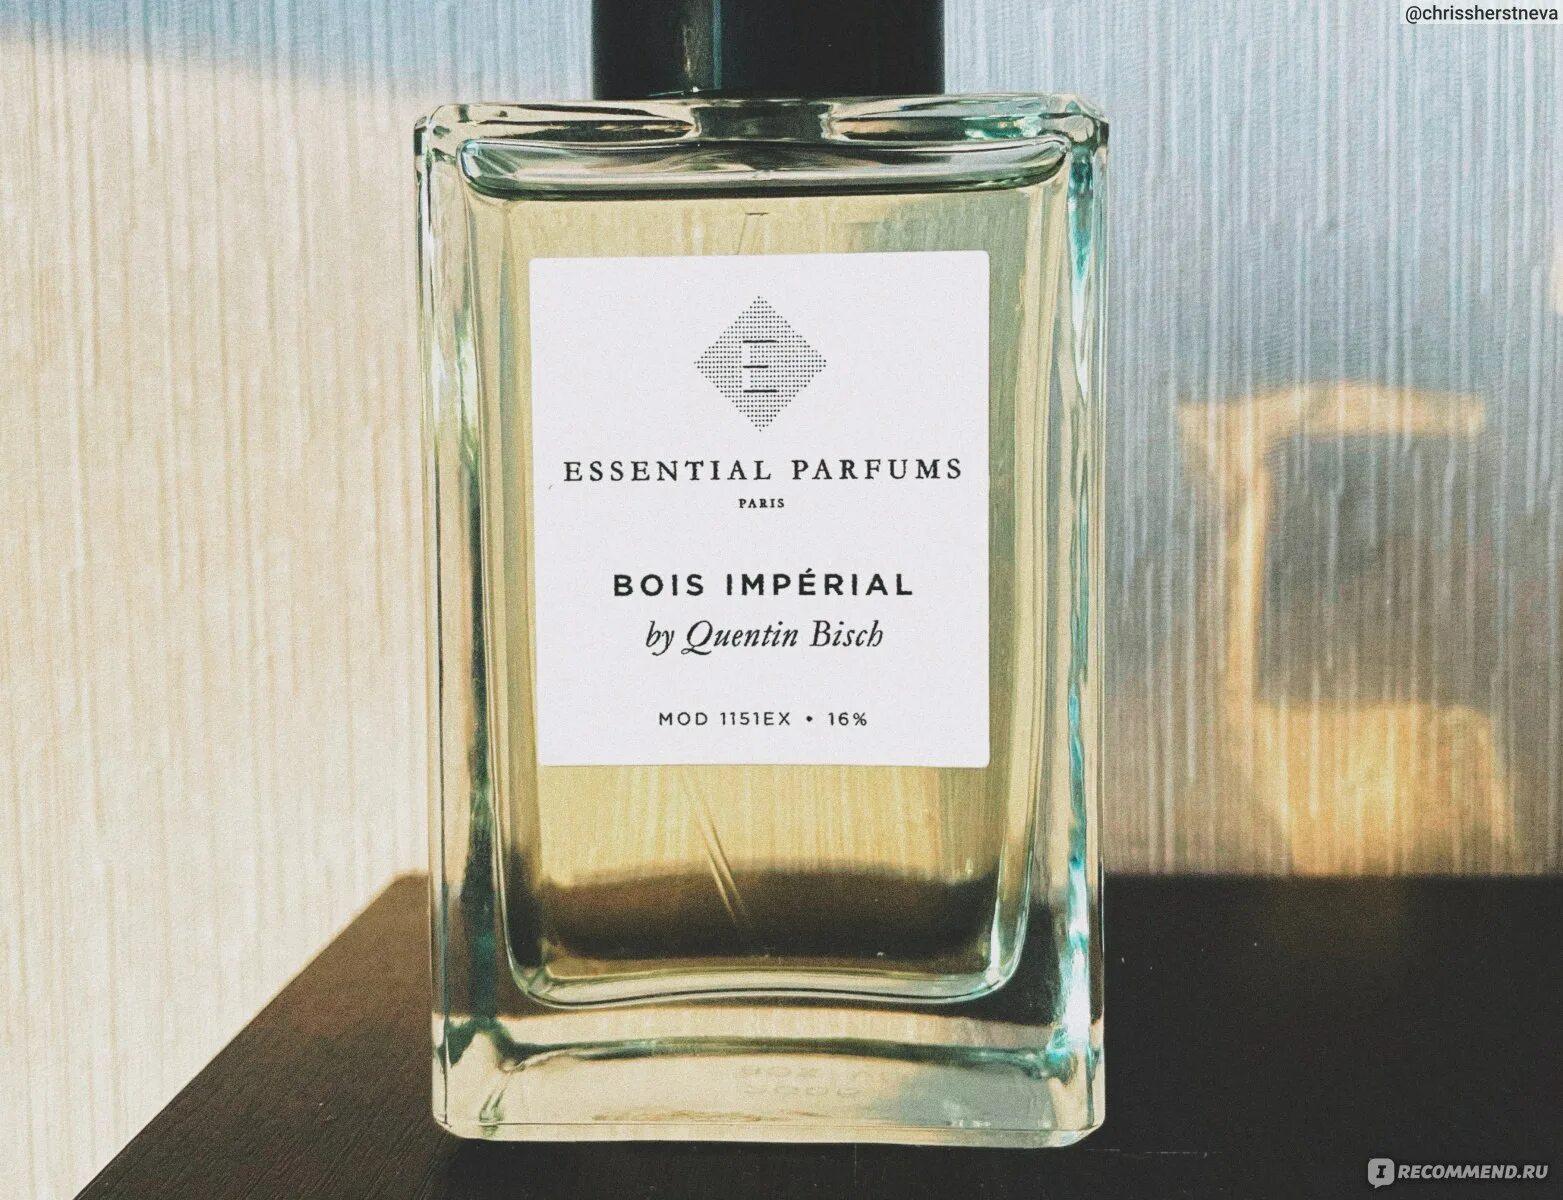 Bois imperial essential parfums limited edition